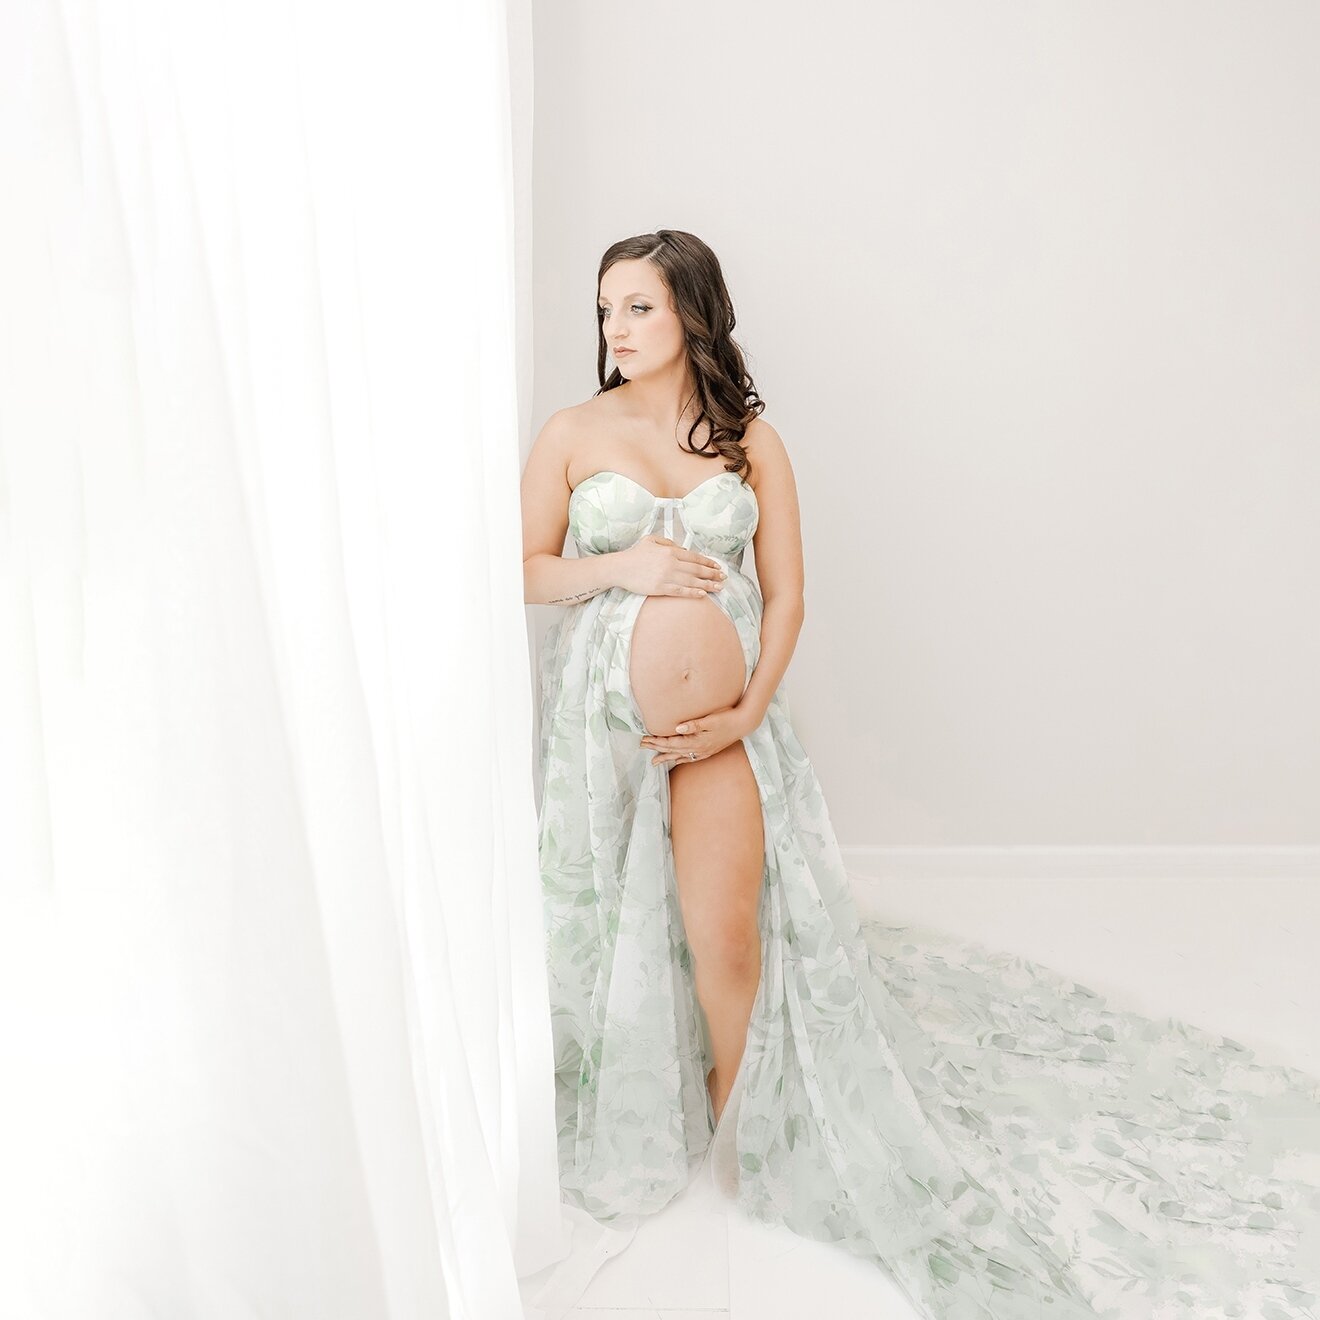 You will never be pregnant with this child again so preserving this fleeting moment will ensure that you and your loved ones will never forget just how spectacular you were&hellip;and are. ⁠
.⁠
.⁠
.⁠
.⁠
.⁠
.⁠
.⁠
.⁠
.⁠
.⁠
#maternity #pregnancyphotos #